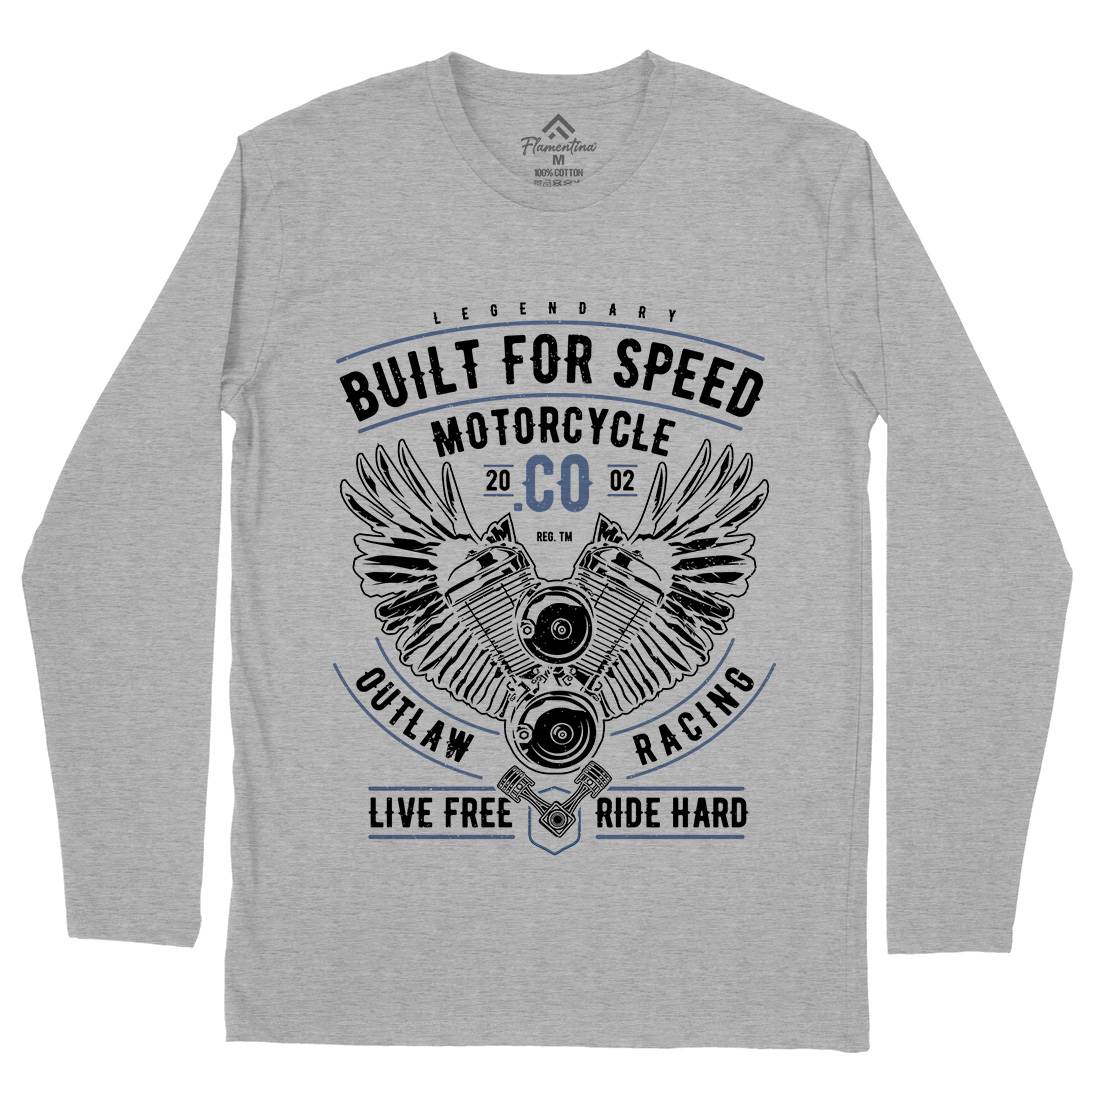 Built For Speed Mens Long Sleeve T-Shirt Motorcycles A628